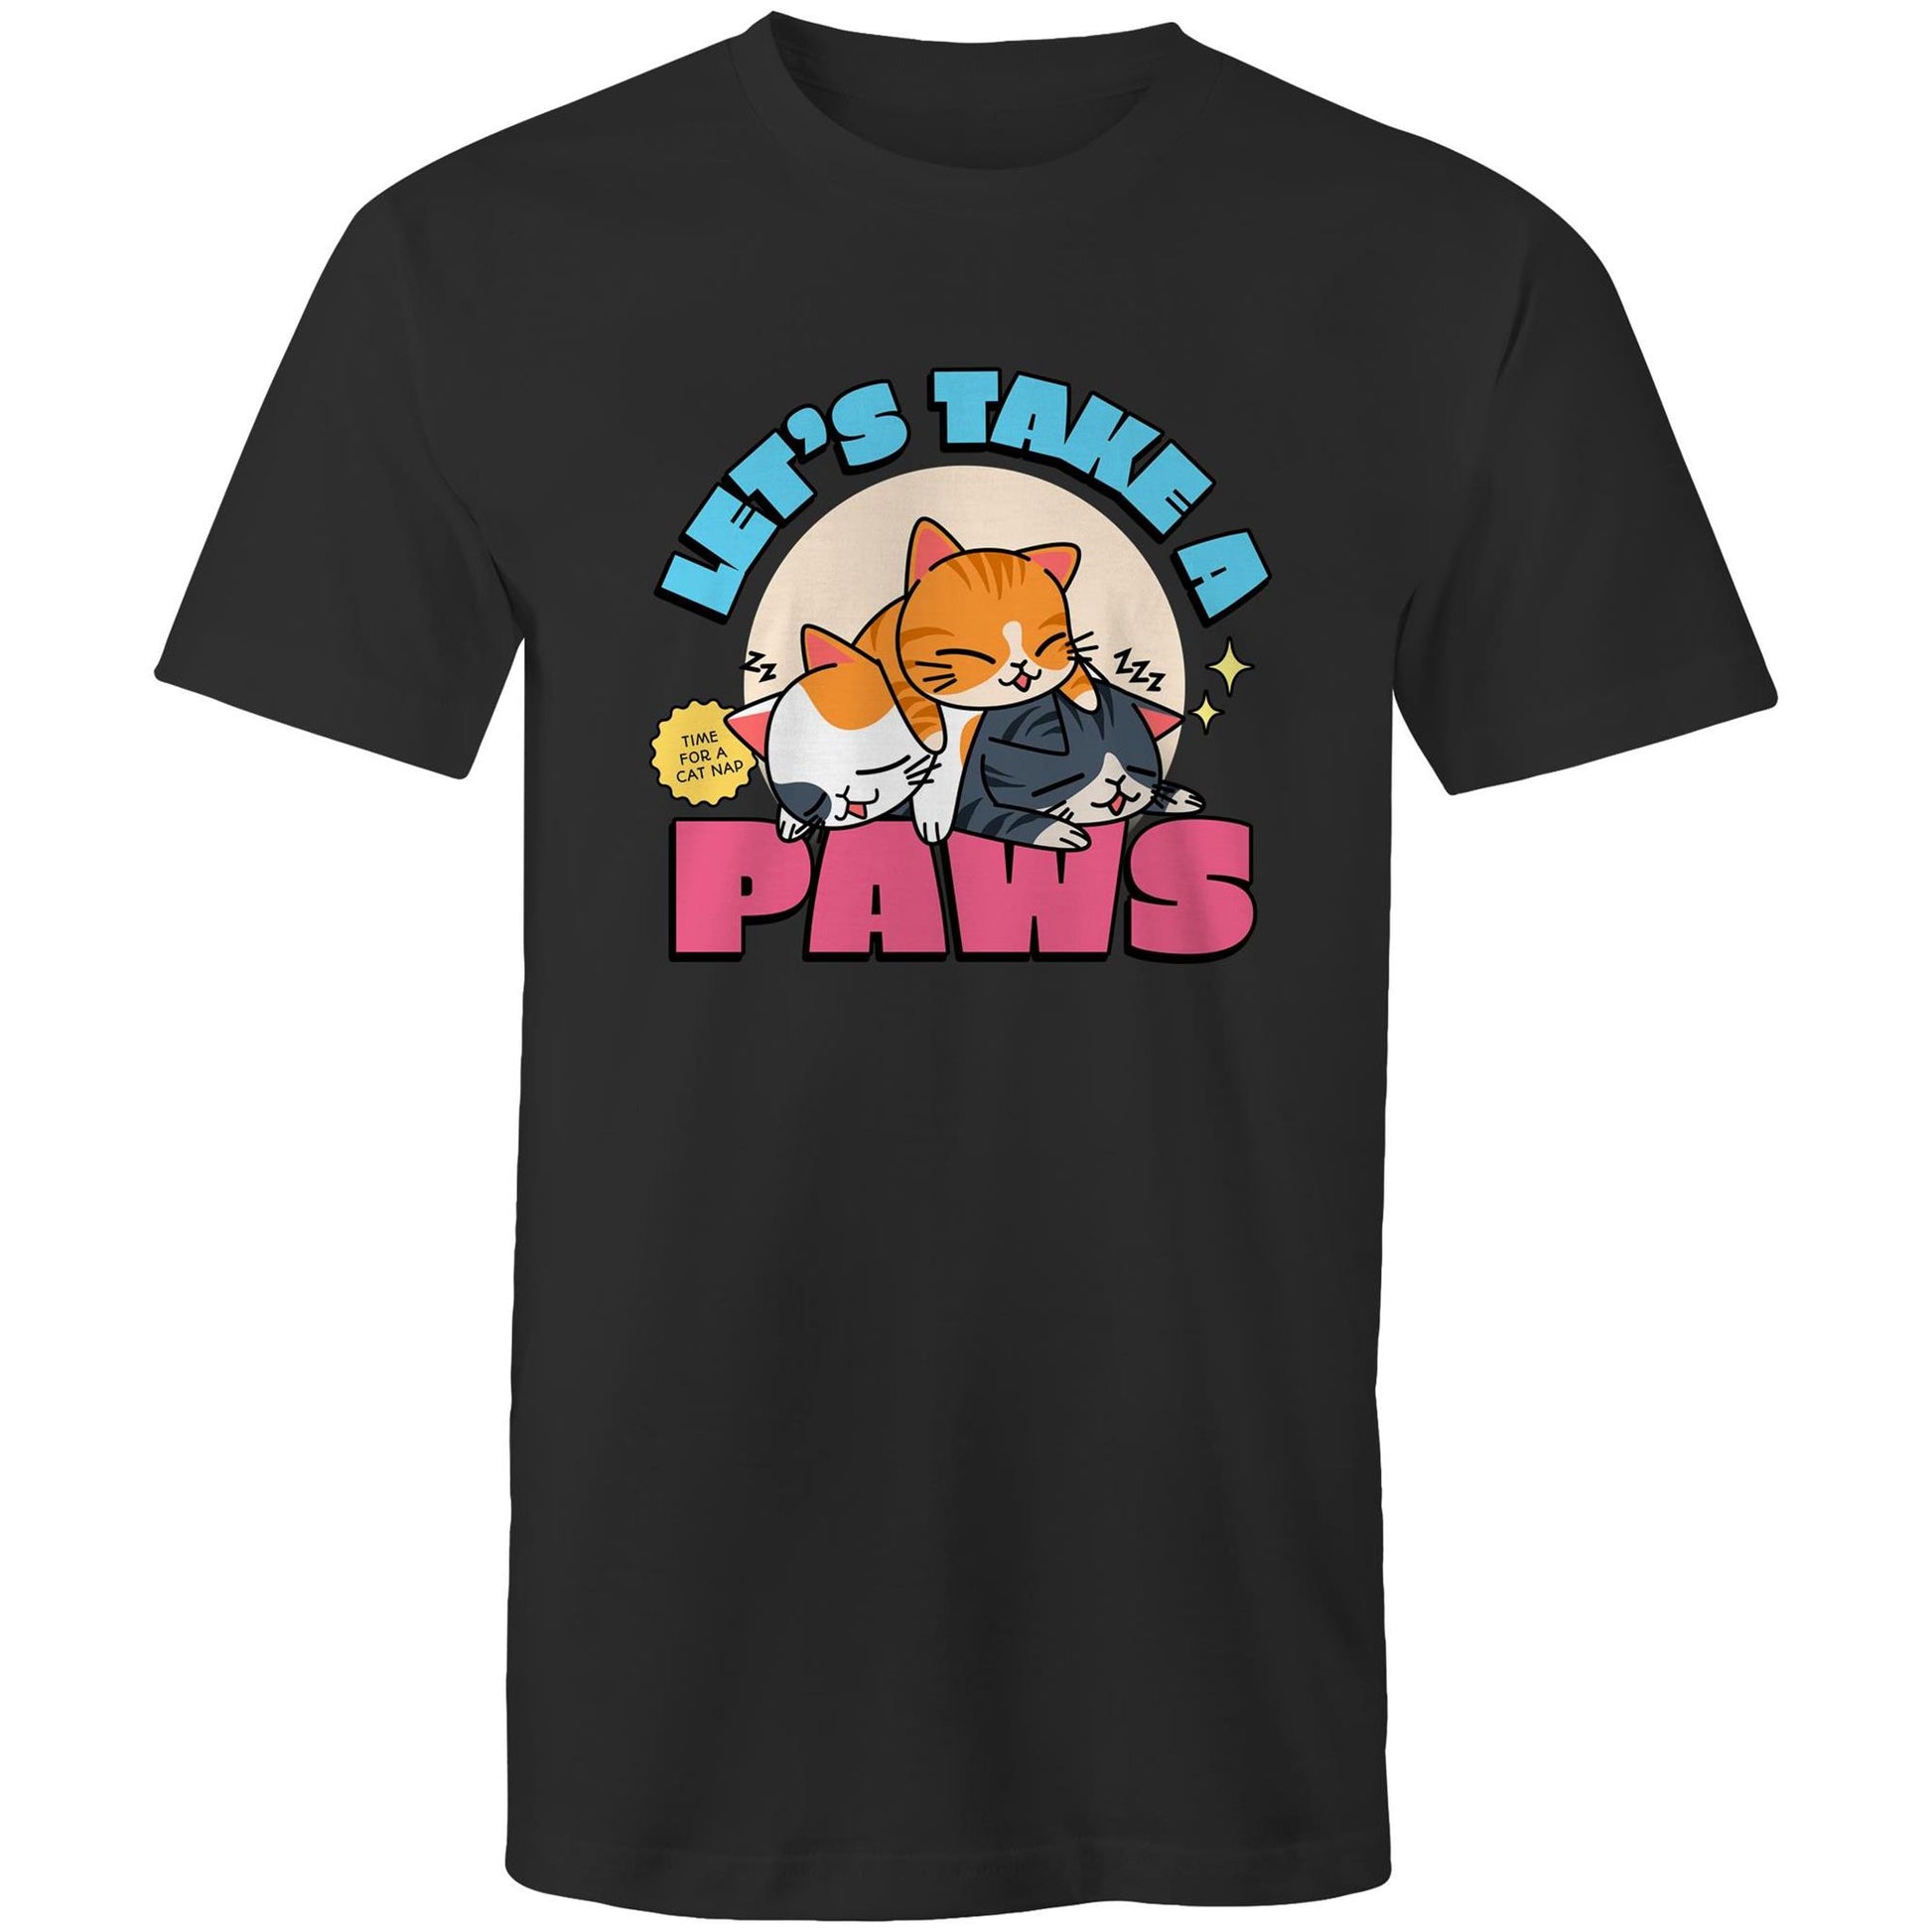 Let's Take A Paws, Time For A Cat Nap - Mens T-Shirt Black Mens T-shirt animal